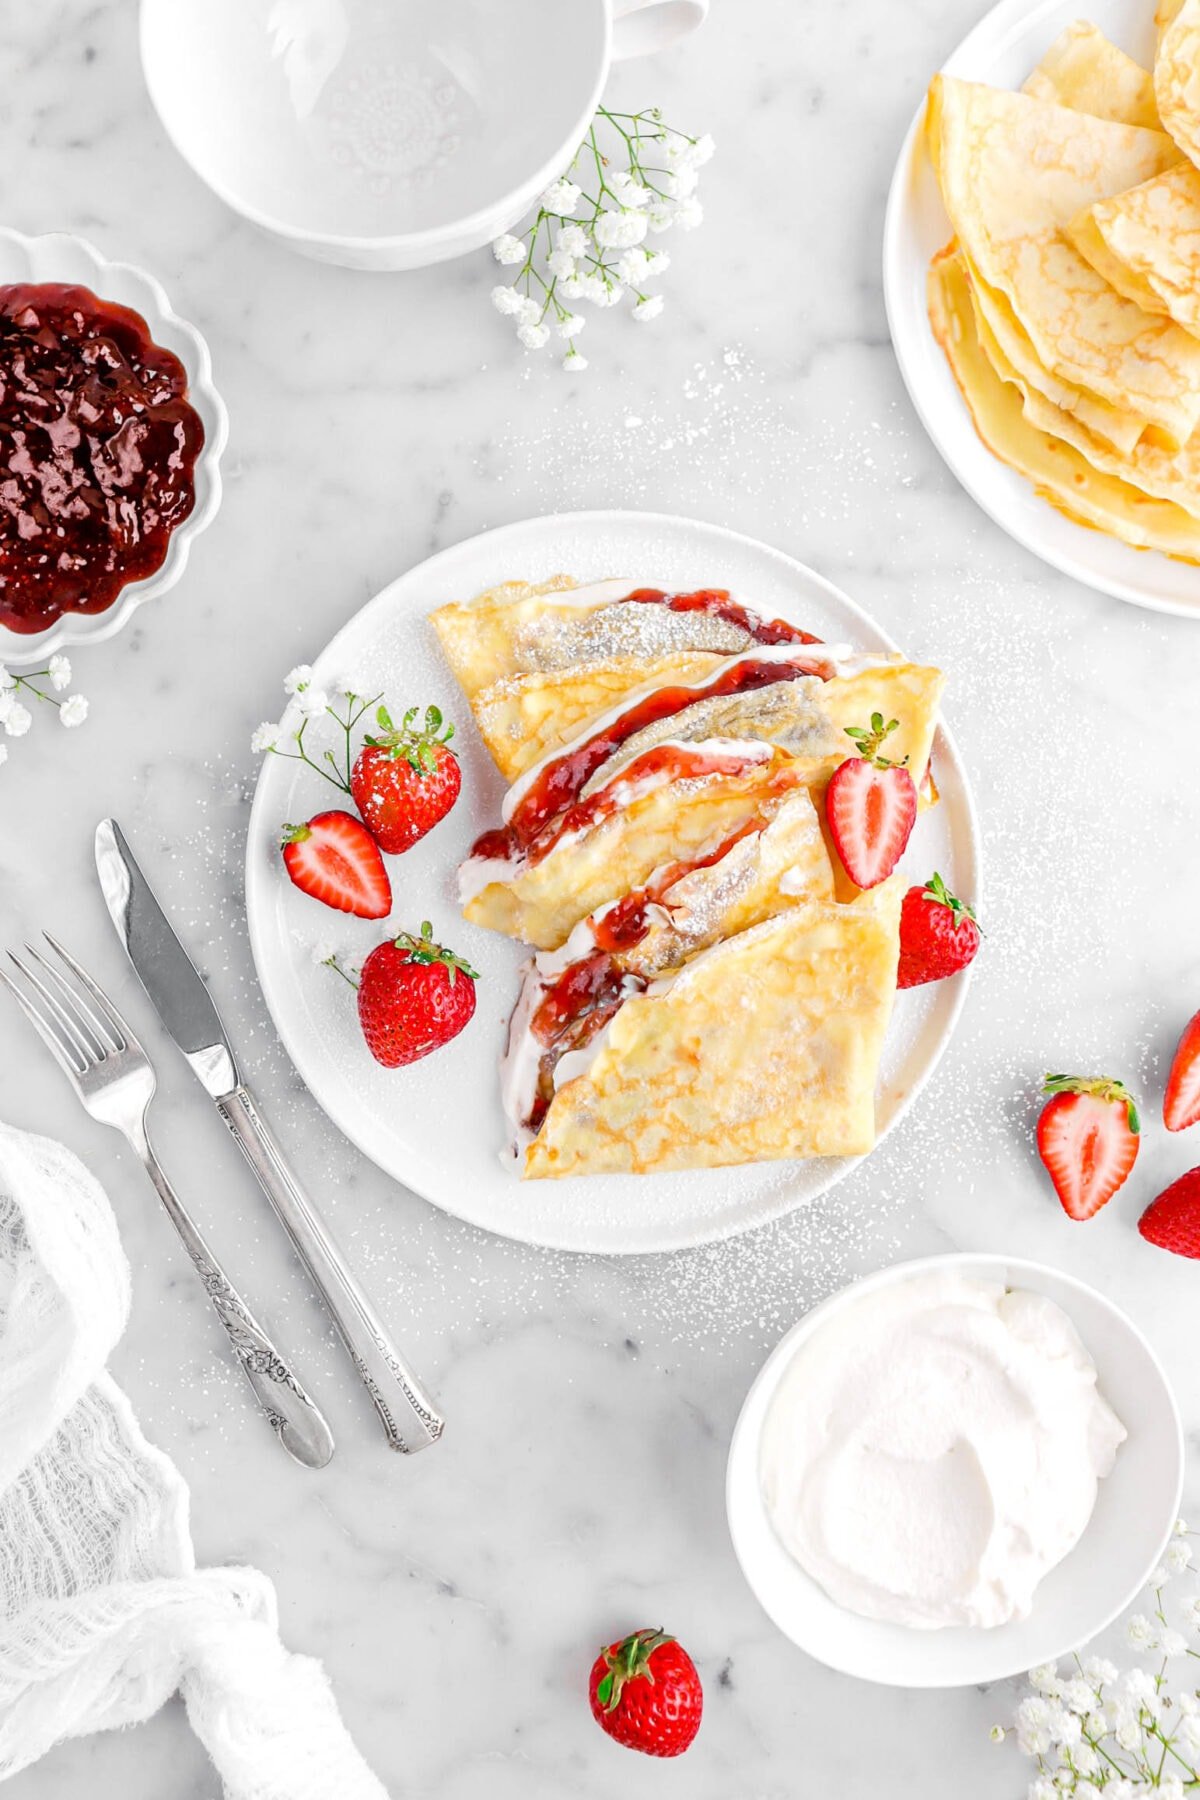 three strawberry and cream crepes on white plate with strawberries and white flowers around, a fork and knife beside, plate of empty crepes, bowl of jam, and bowl of whipped cream around.